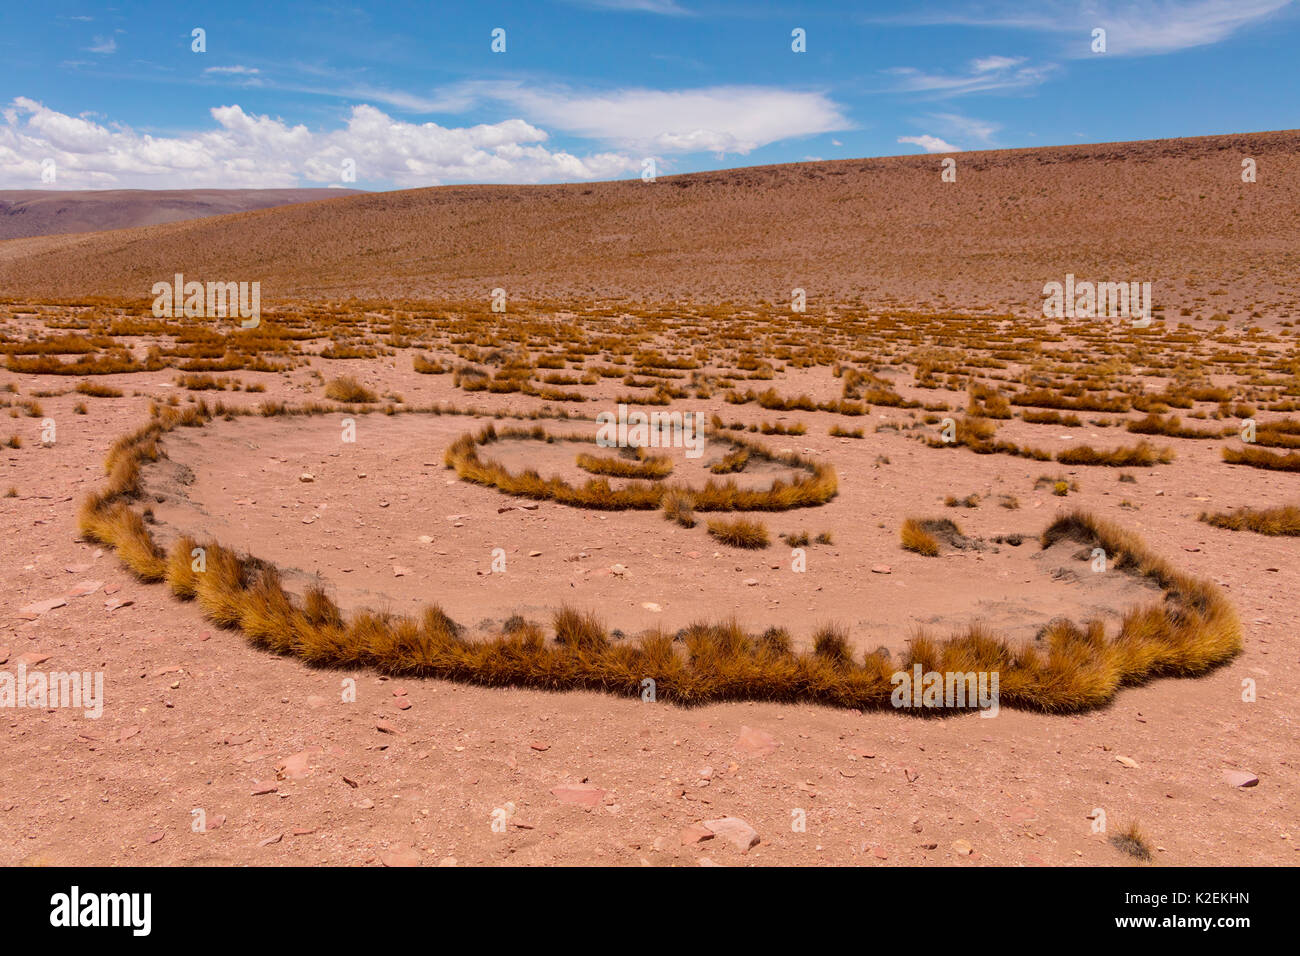 High Altiplano with tussock grass called Paja brava (Festuca orthophylla) showing clonal growth spread. Bolivia. December 2016. Stock Photo